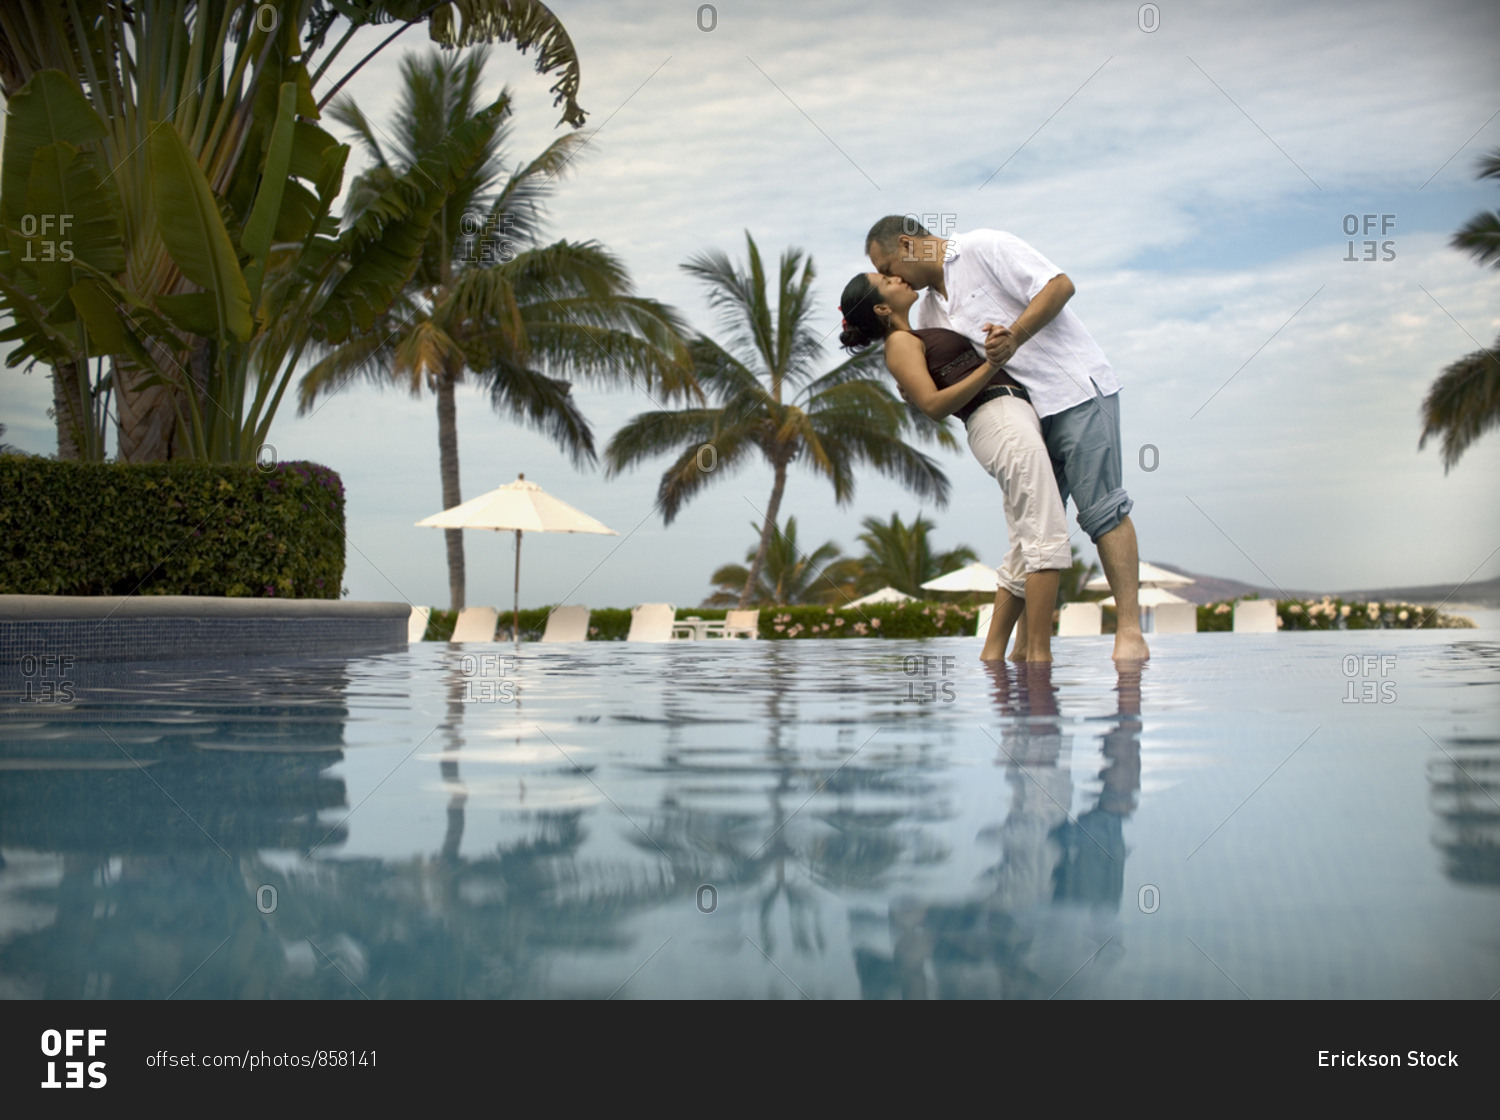 A man smooches his soul mate near the swimming pool.